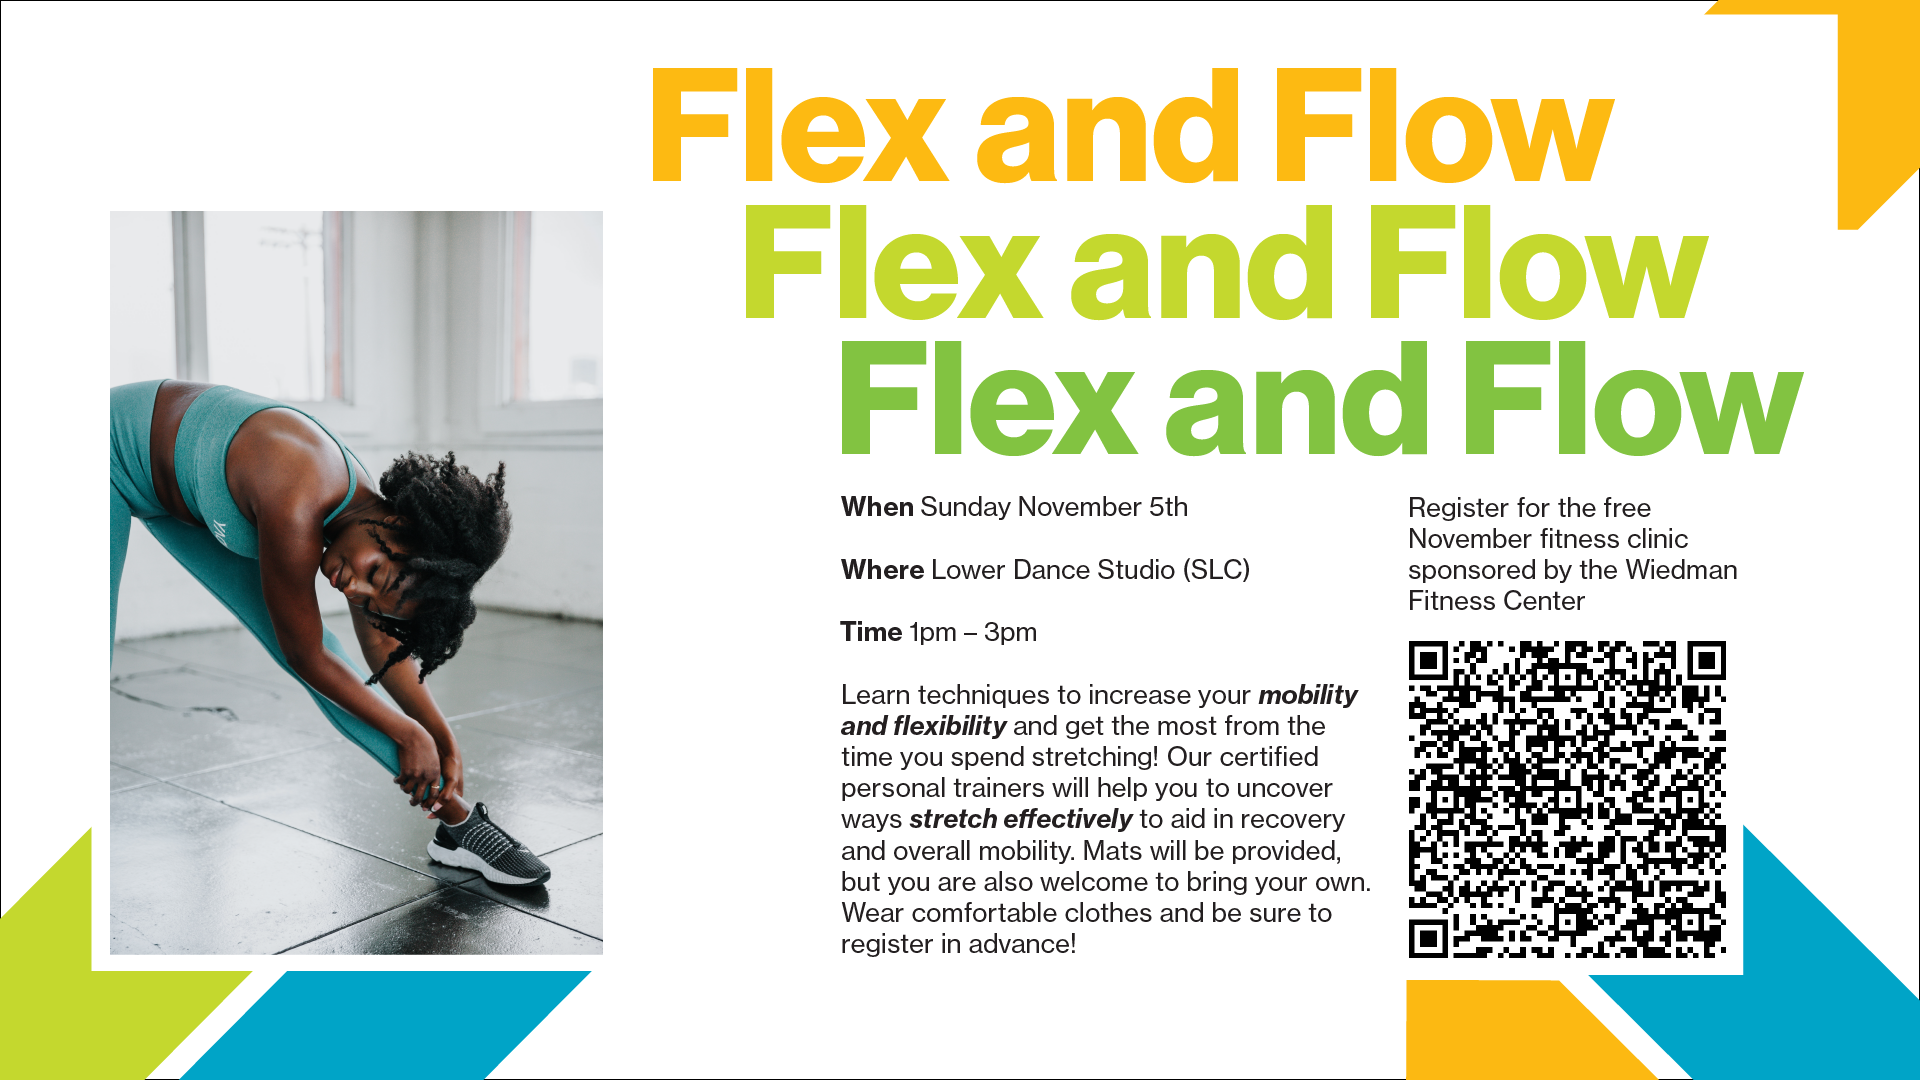 Woman stretching with text describing flex & flow clinic